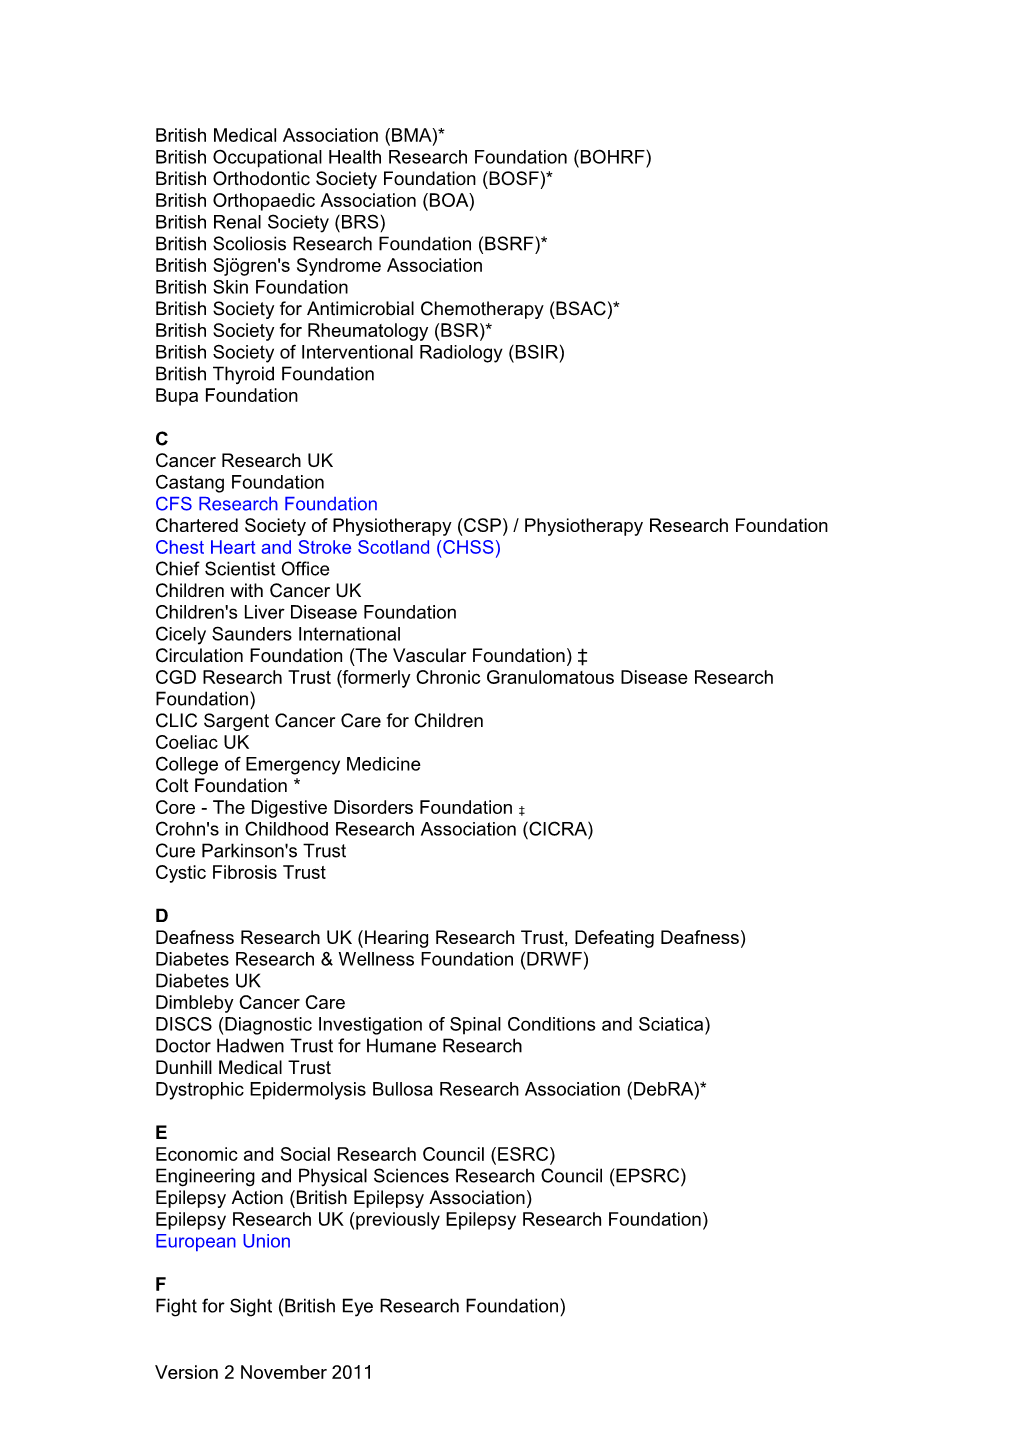 Funders Whose Research Is Eligible for Support from NHS Research Scotland (NRS)